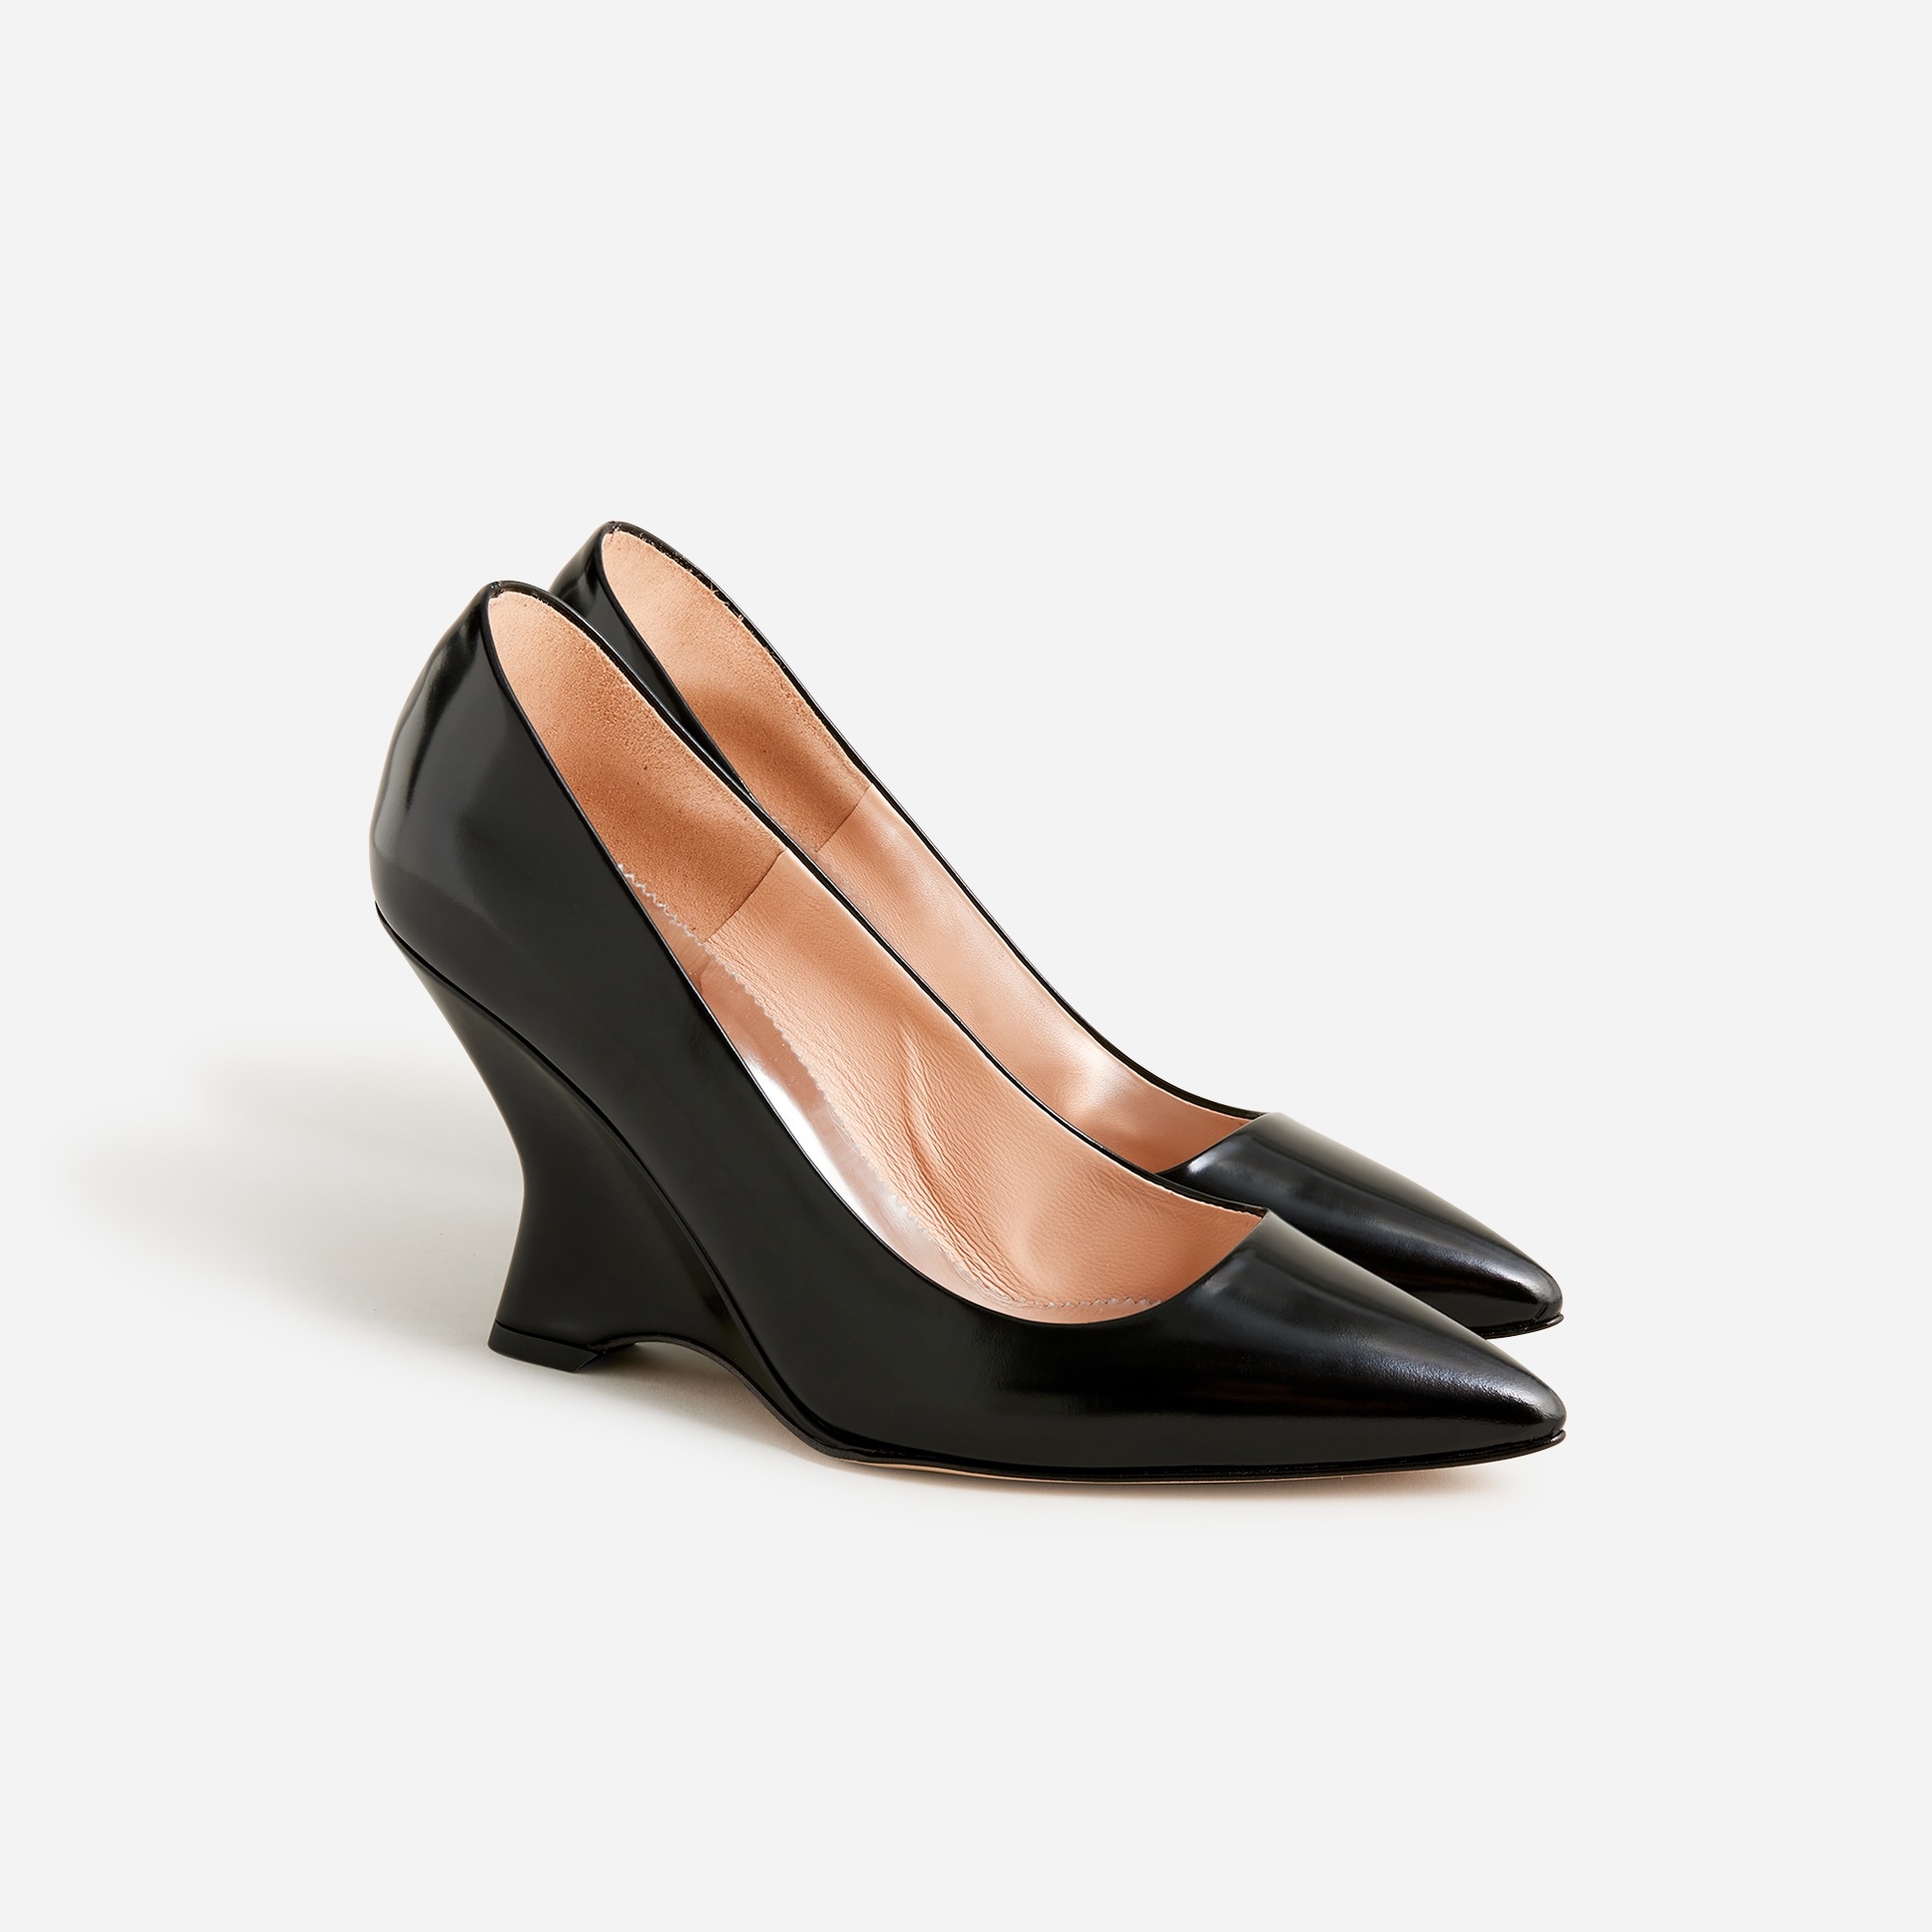  Collection wedge pumps in Italian spazzolato leather